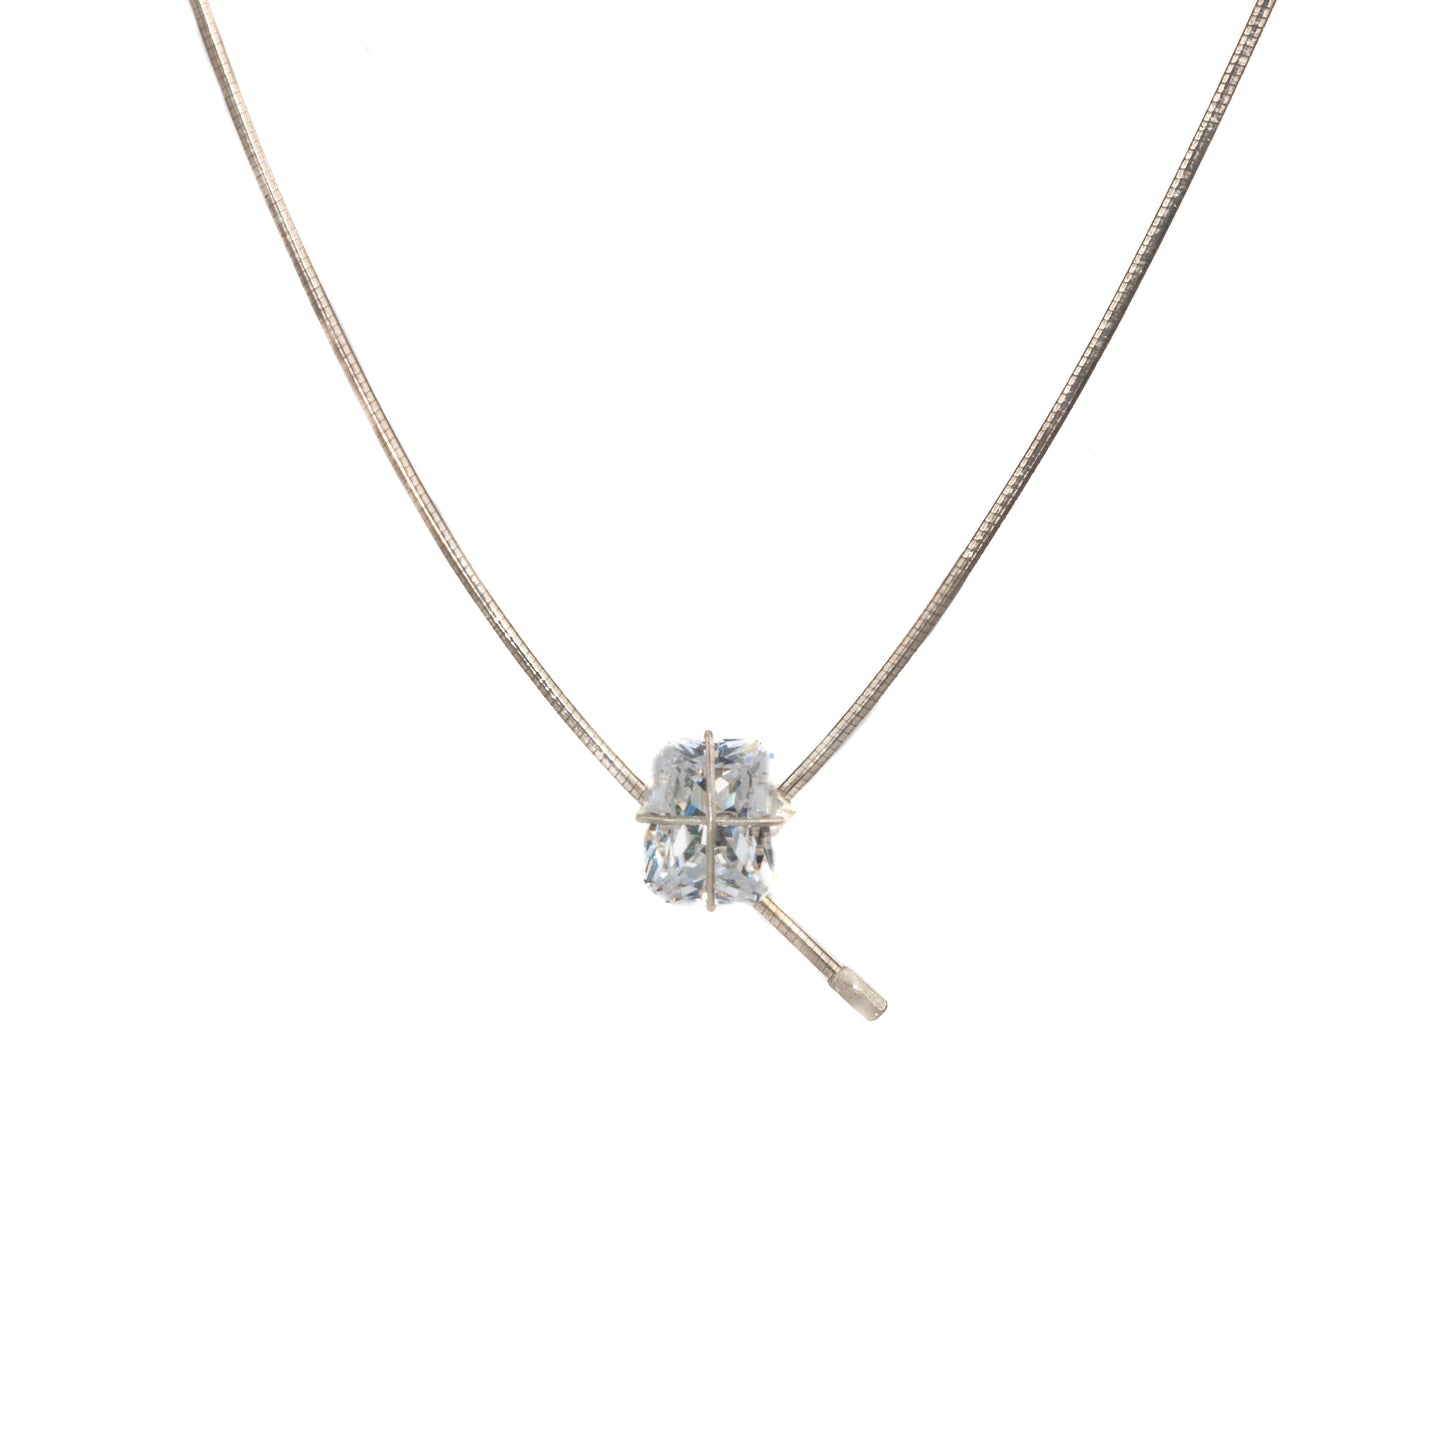 Mysterium Collection "Gift Wrap" CZ Necklace